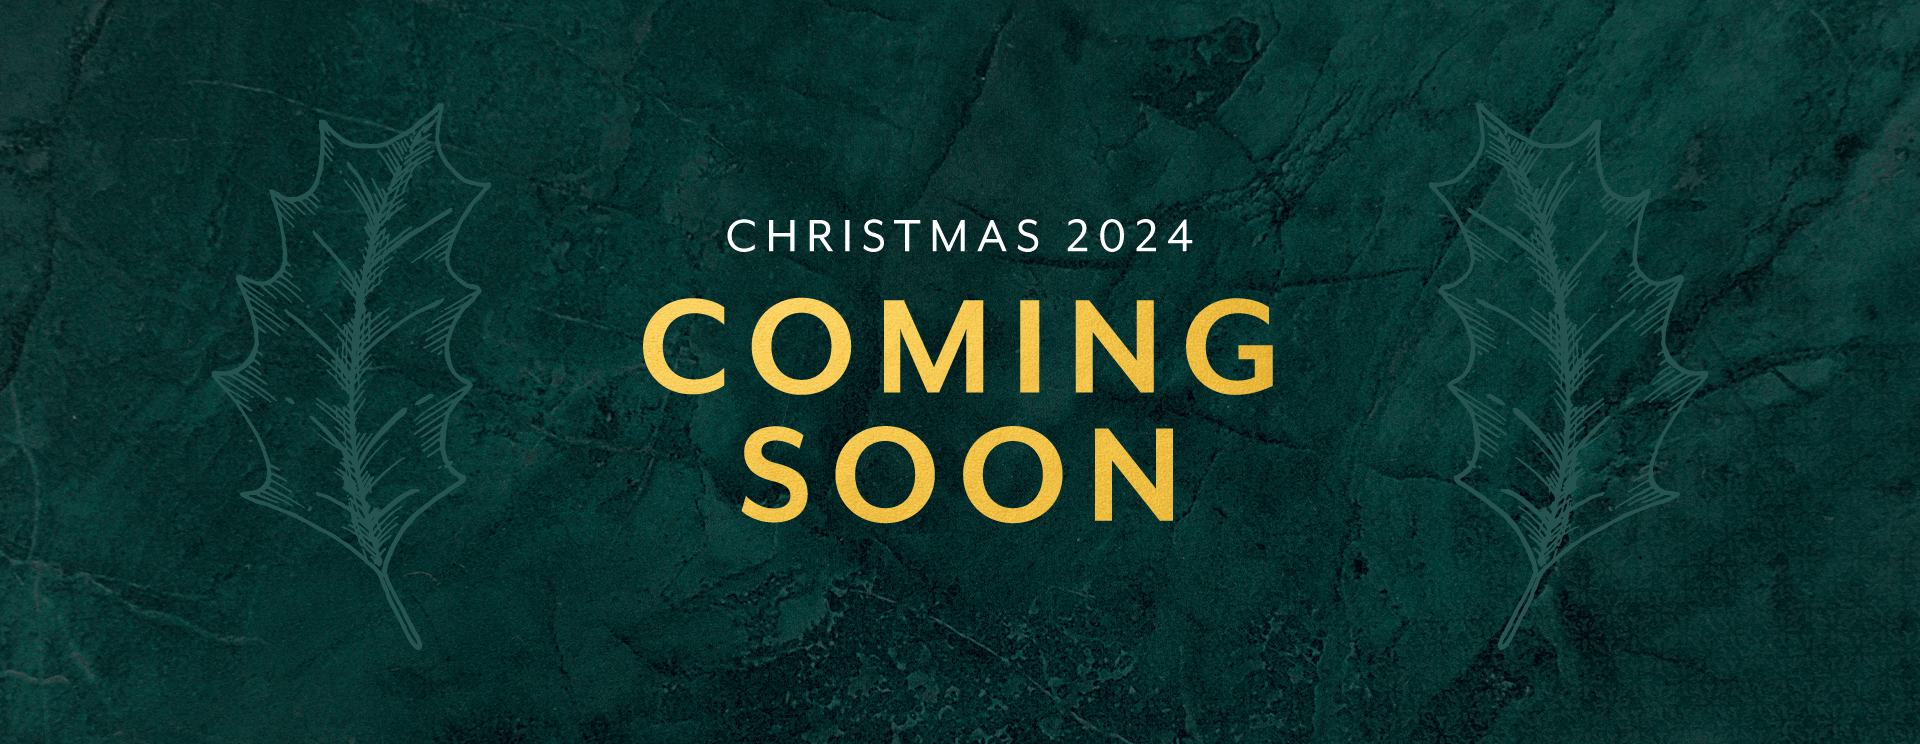 Christmas 2024 at Winterbourne Down